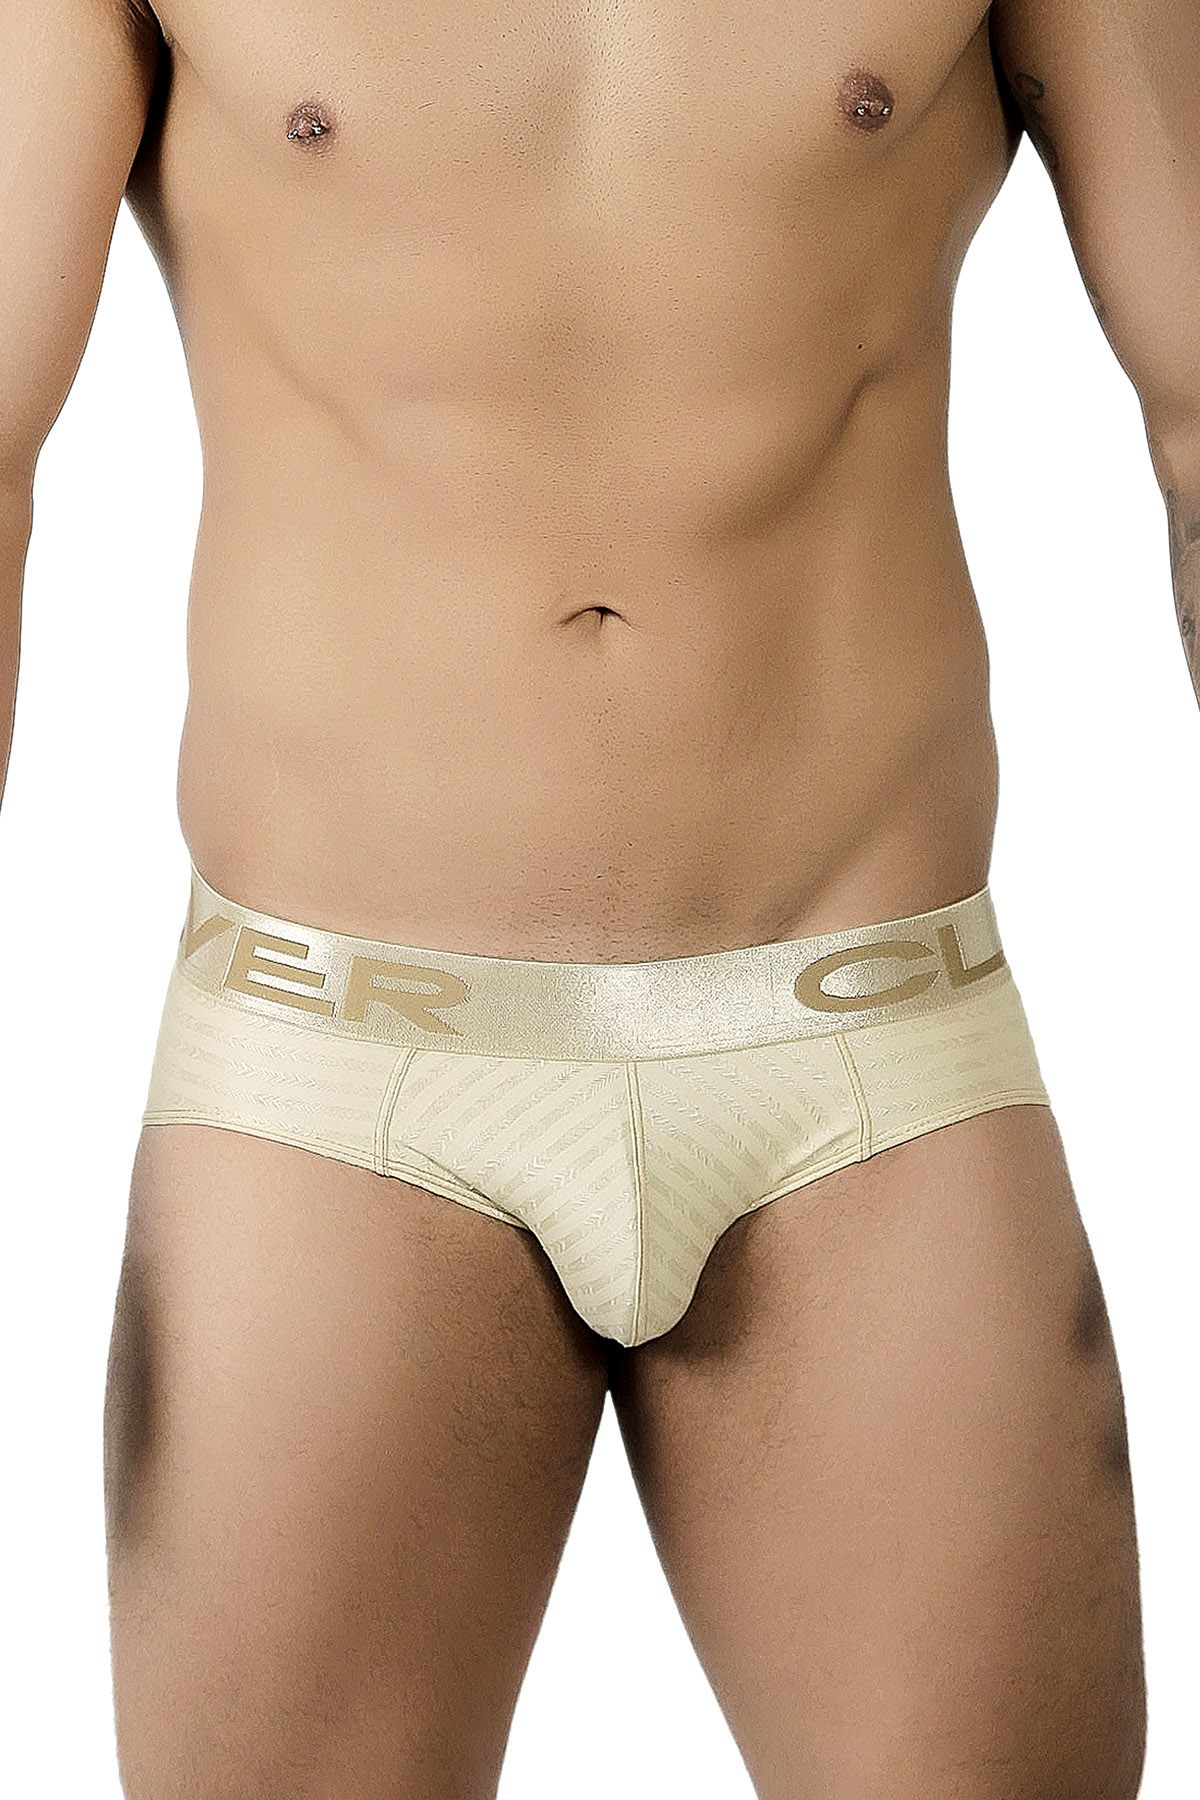 Clever Gold Limited Edition Textured Stripe Latin Brief